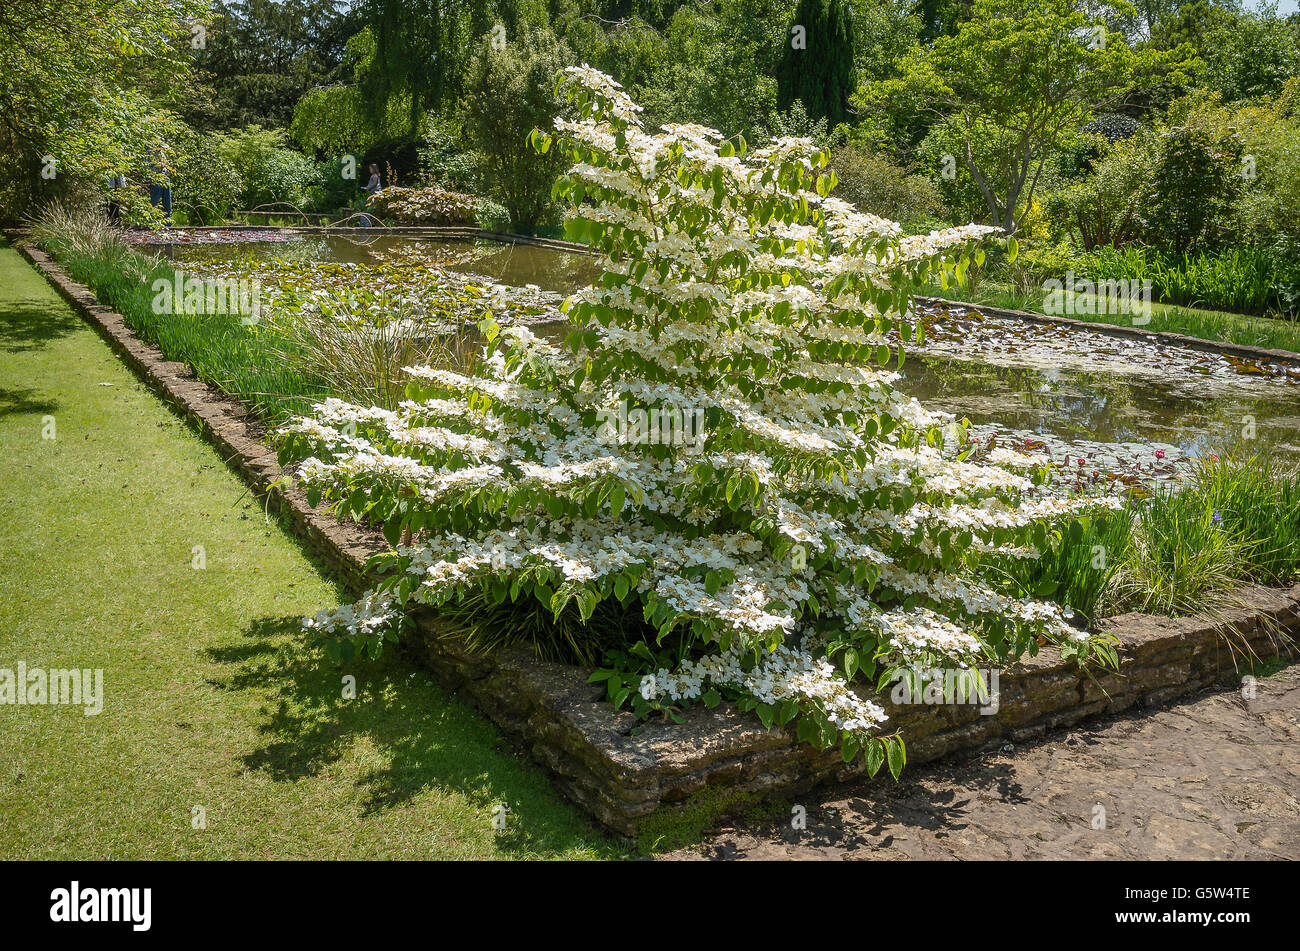 Viburnusm plicatum Lanarth as a feature plant at the corner of an ornamental lily pool in an English garden Stock Photo